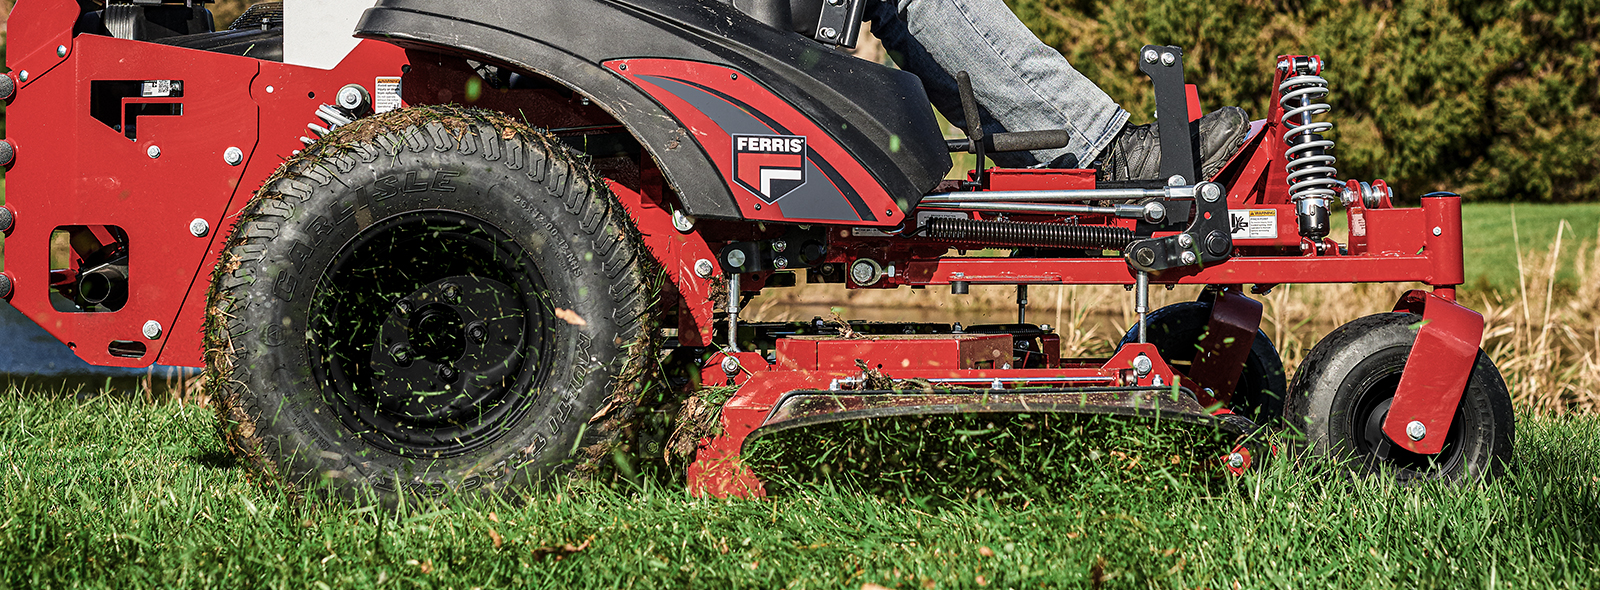 Financing with Ferris Mowers